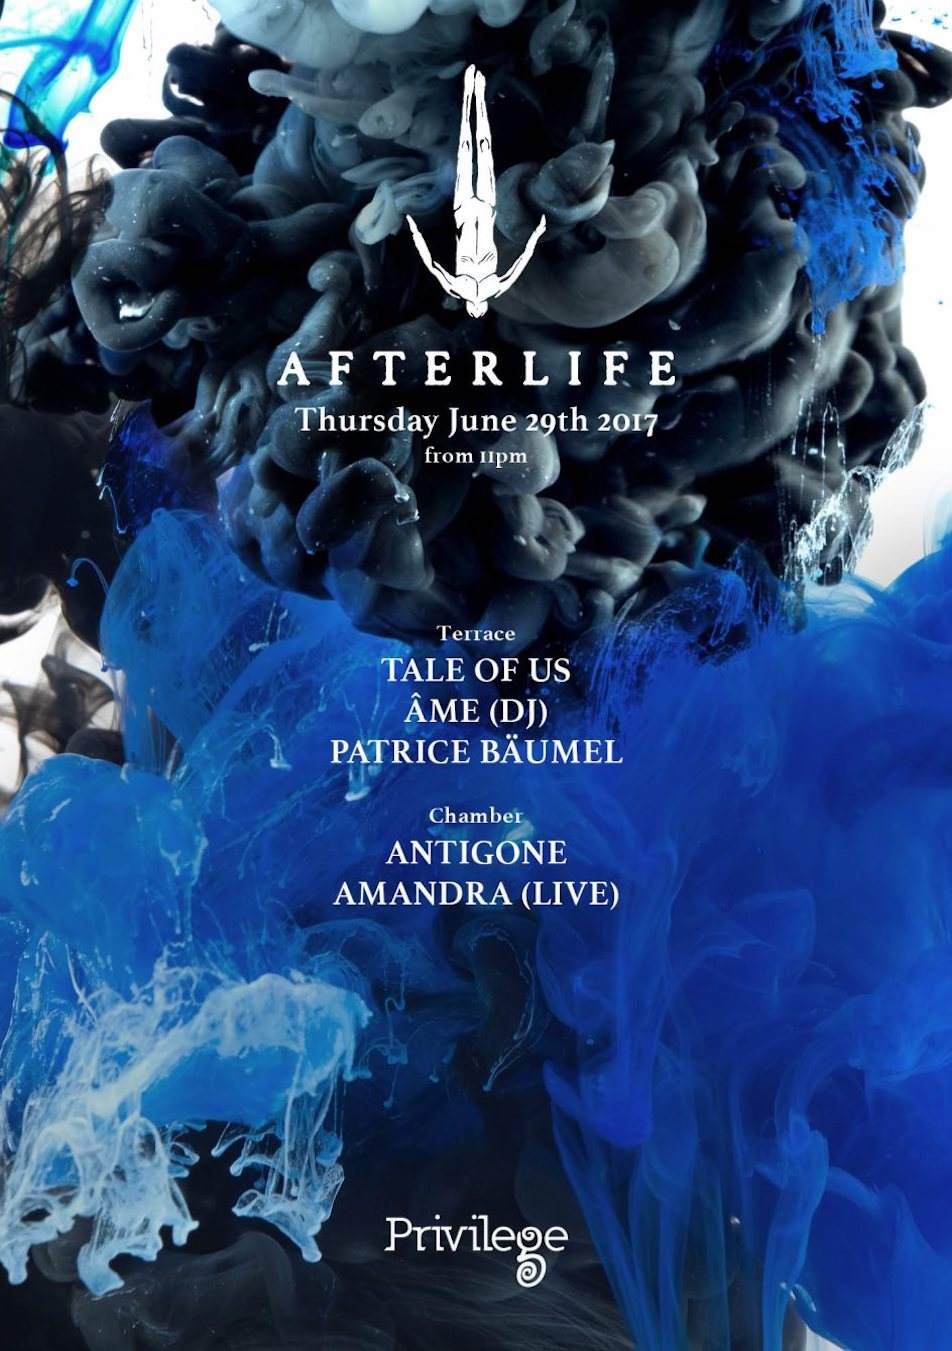 Âme's Kristian Beyer joins Tale Of Us at Afterlife Ibiza opening in June image